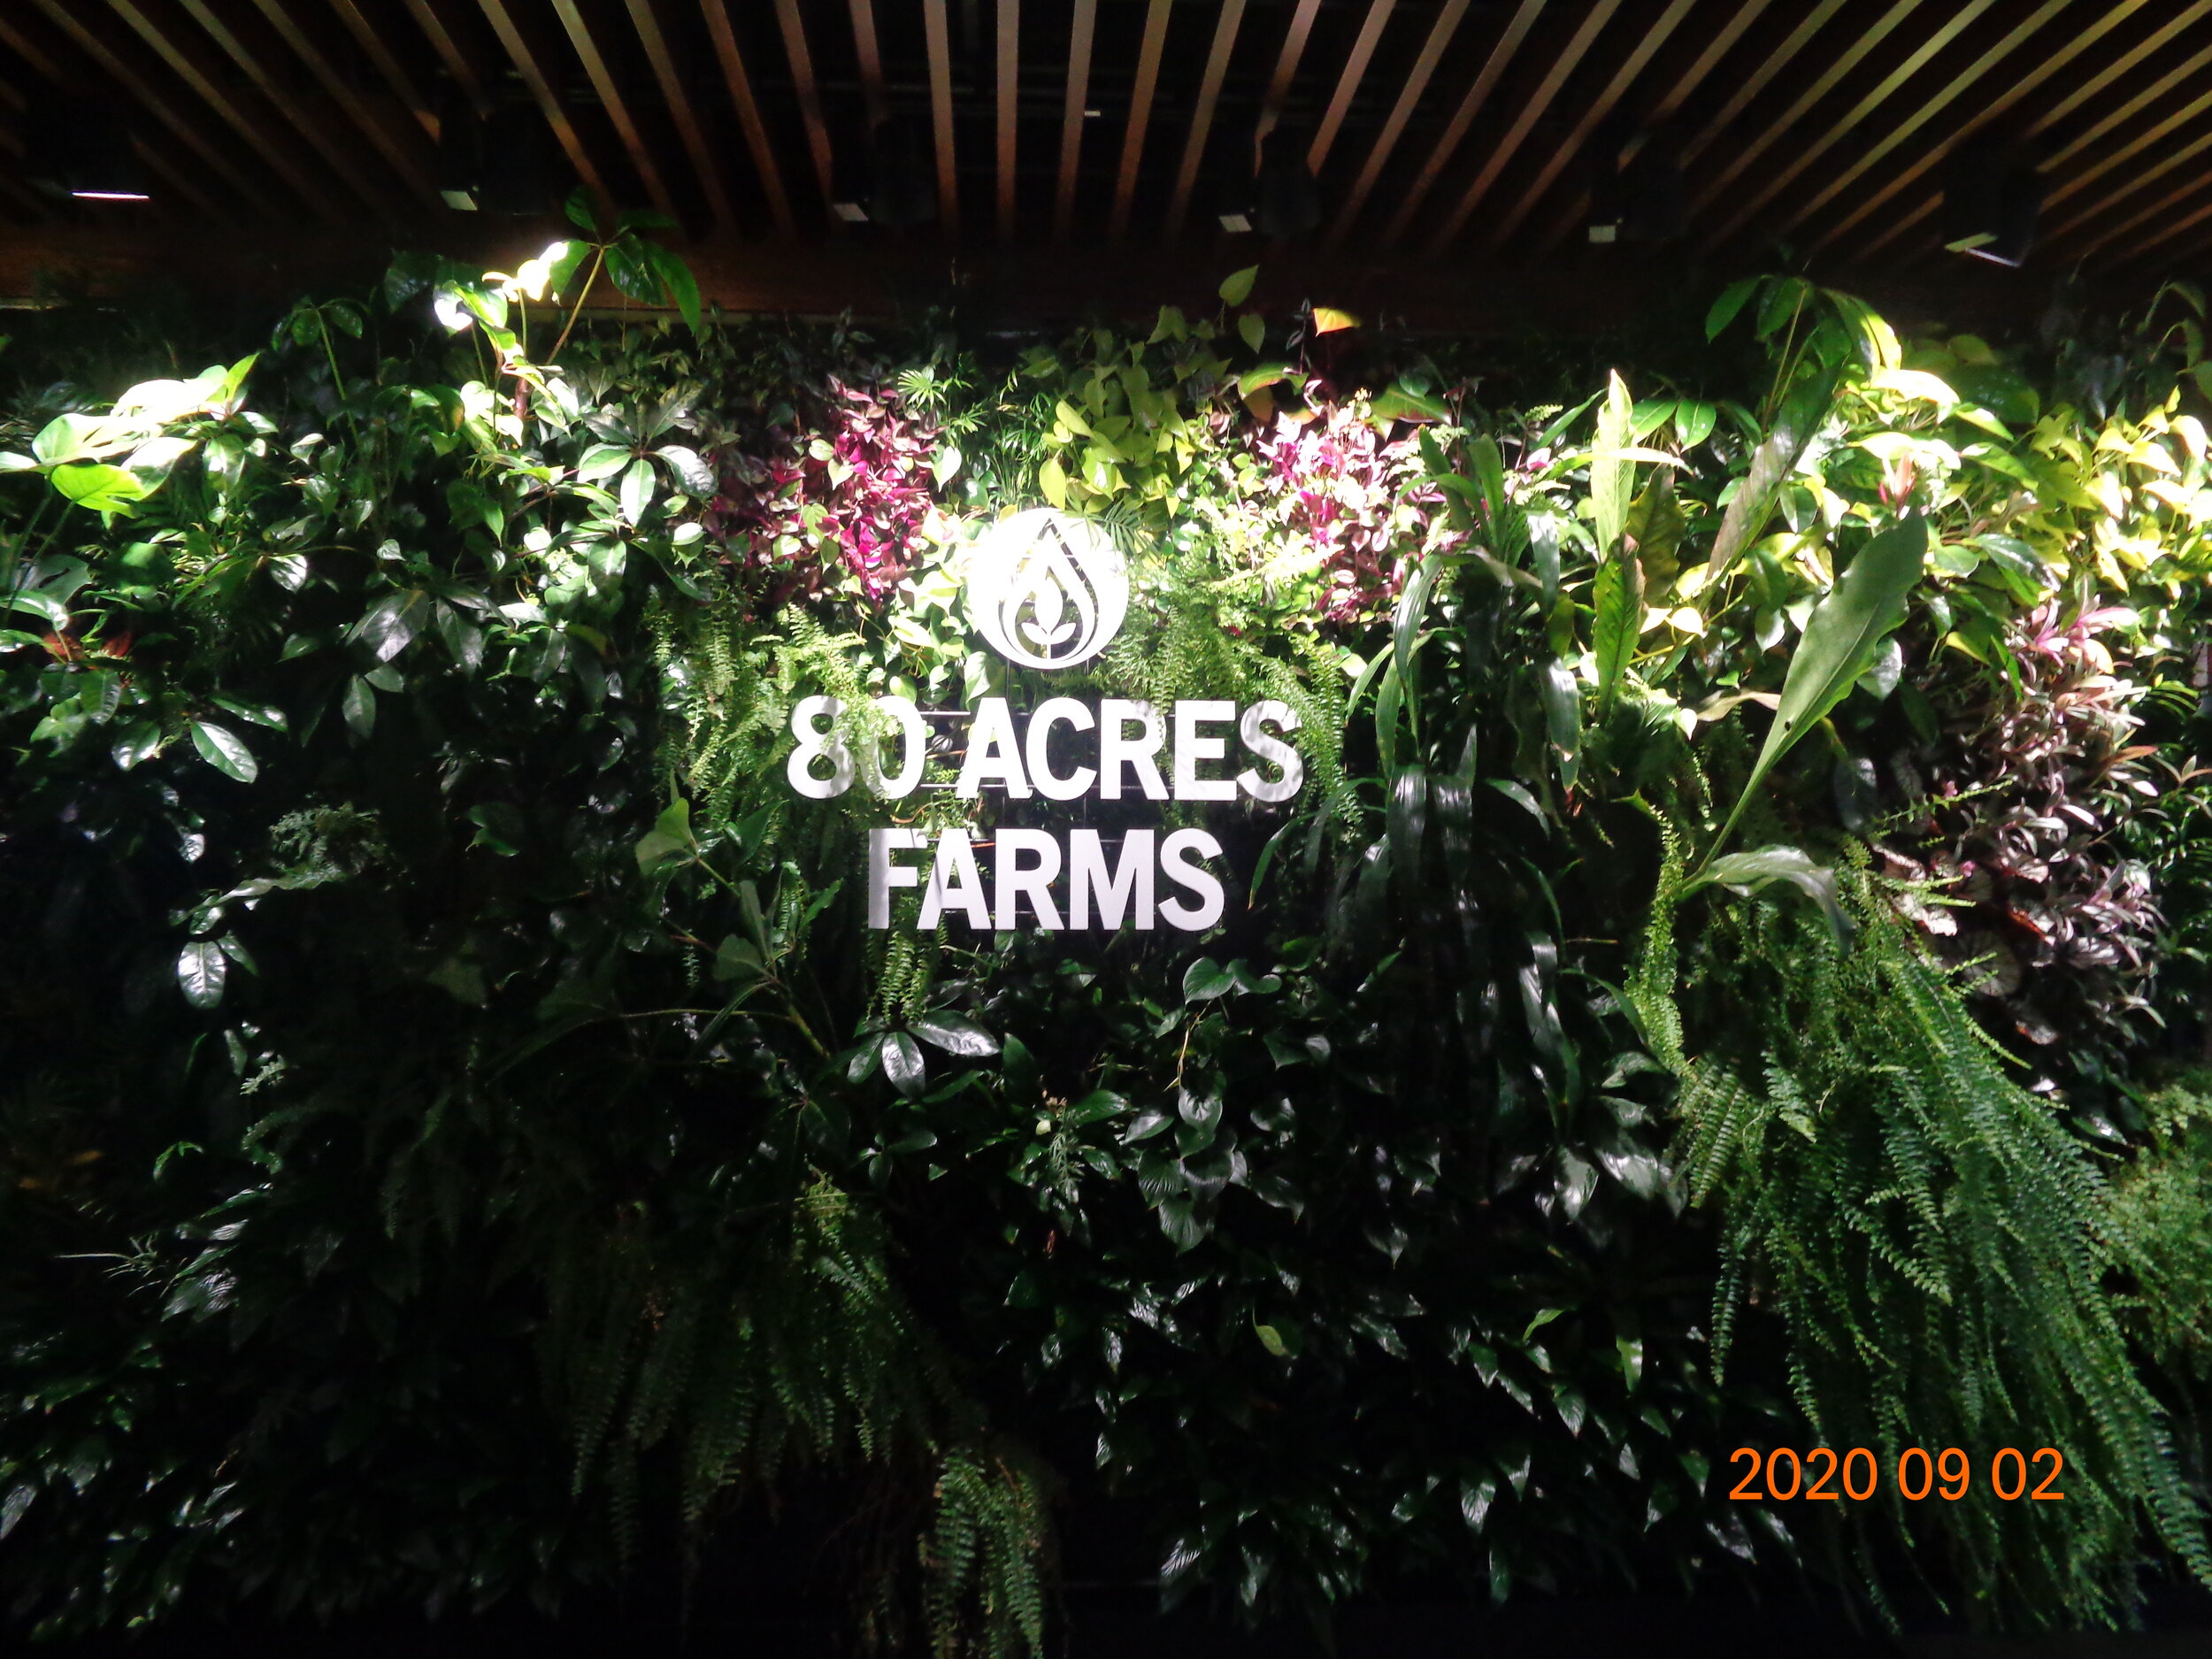 2001520 - 80 Acres Farms - Living Wall Dimensional Lettering  (1).JPG